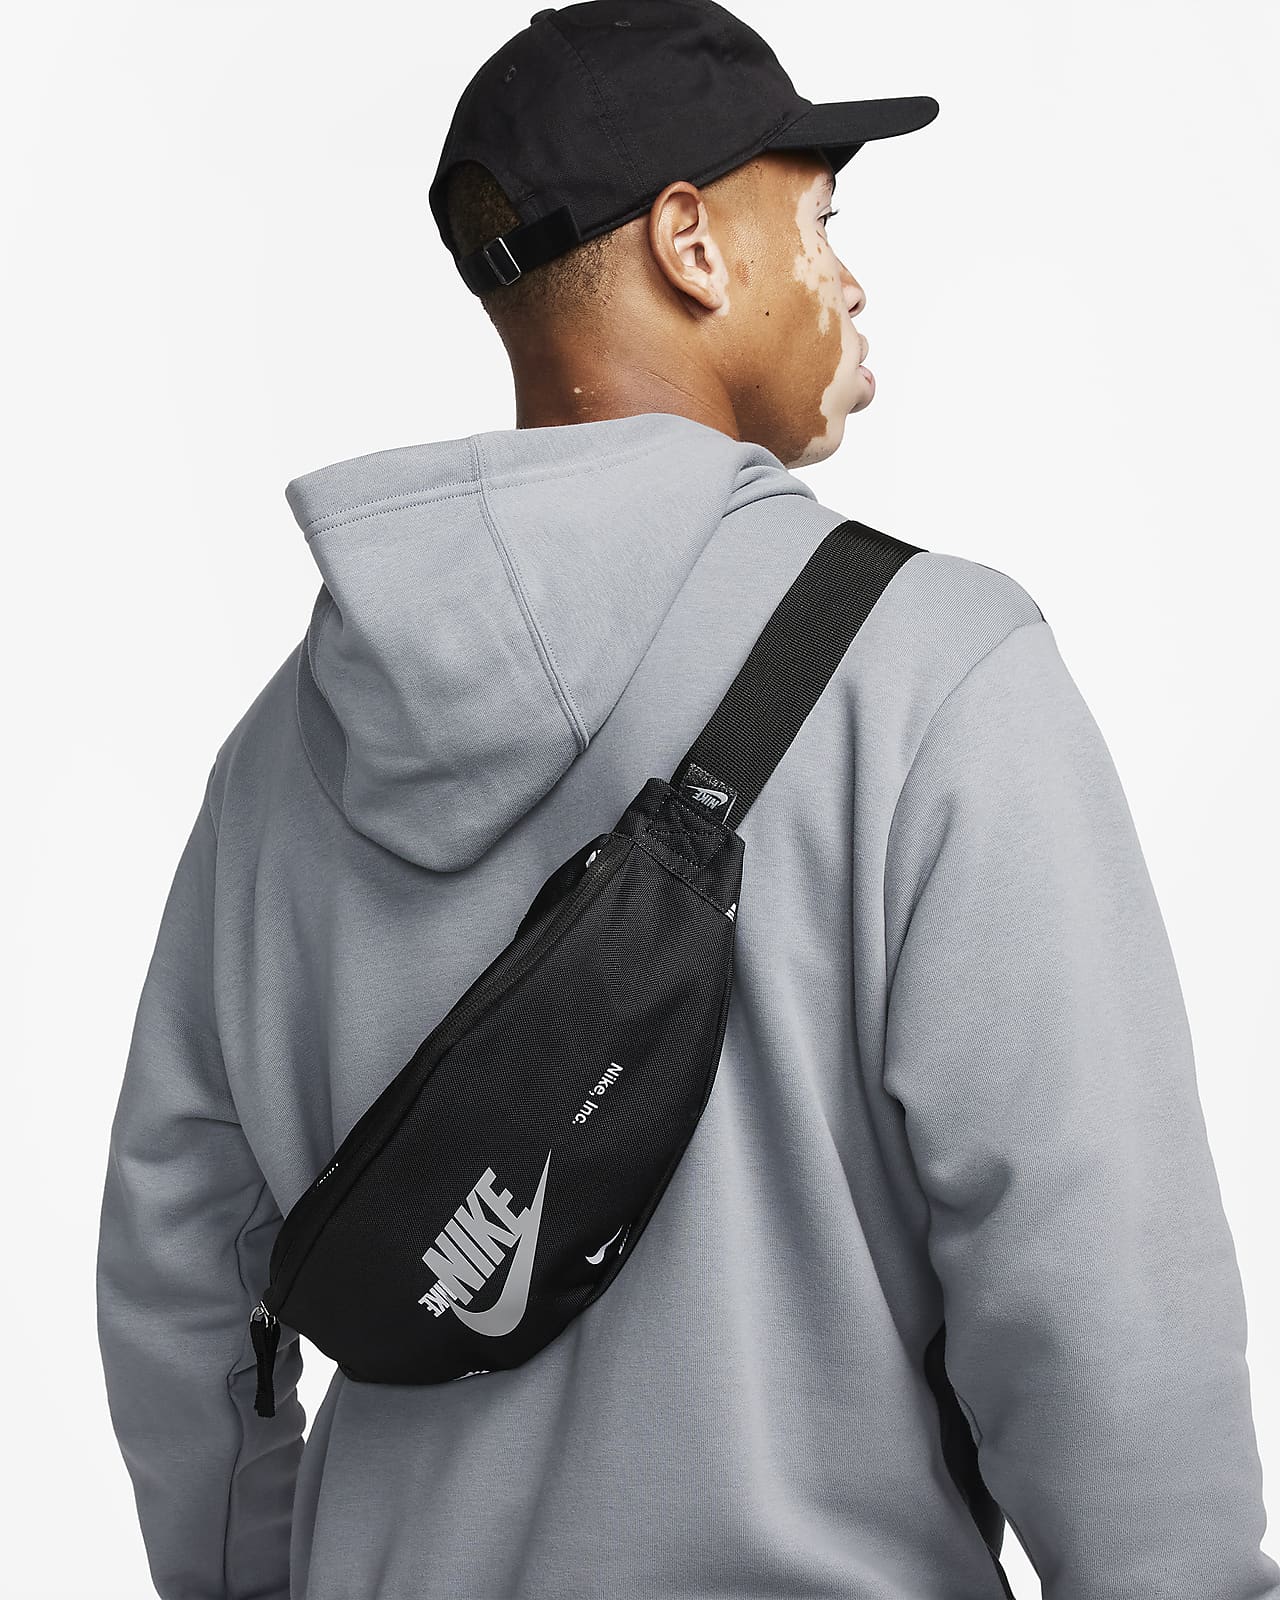 Nike Heritage Hip Pack Fanny Pack